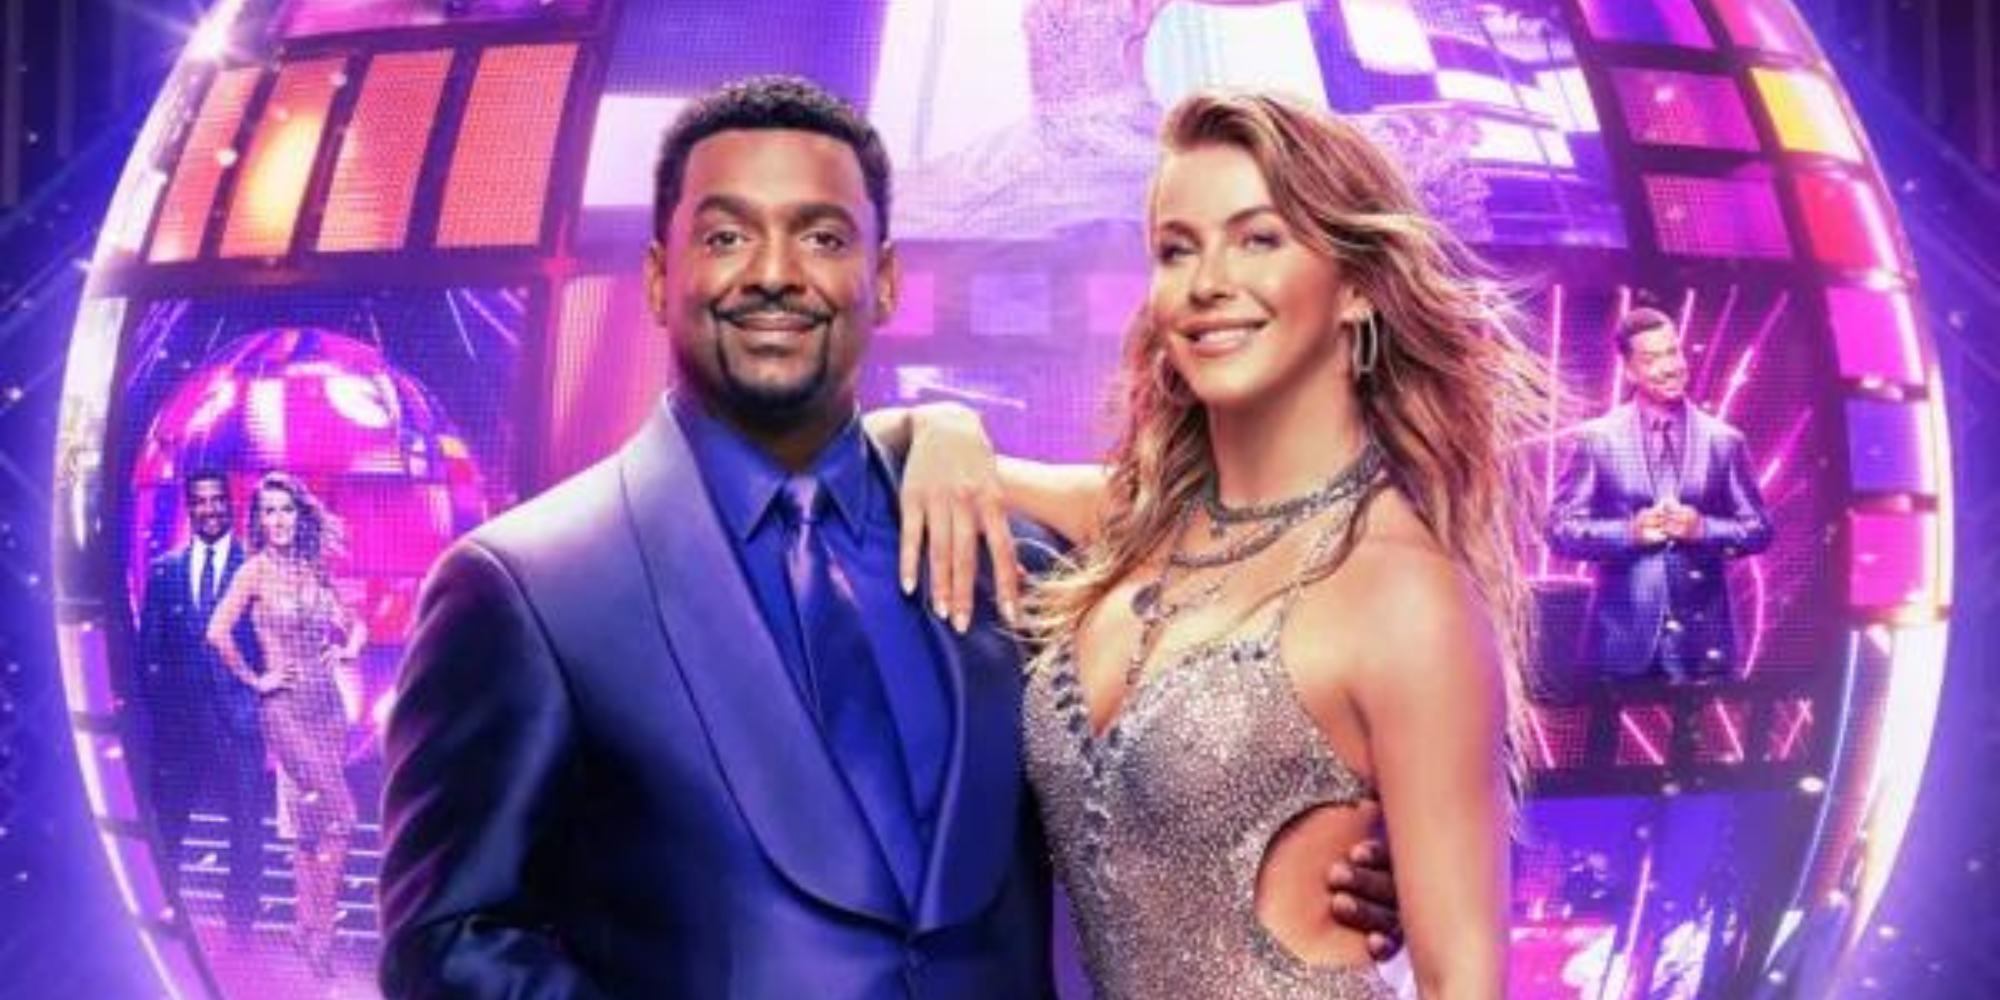 dancing with the stars julianne hough and alfonso riberio smiles and poses for promo